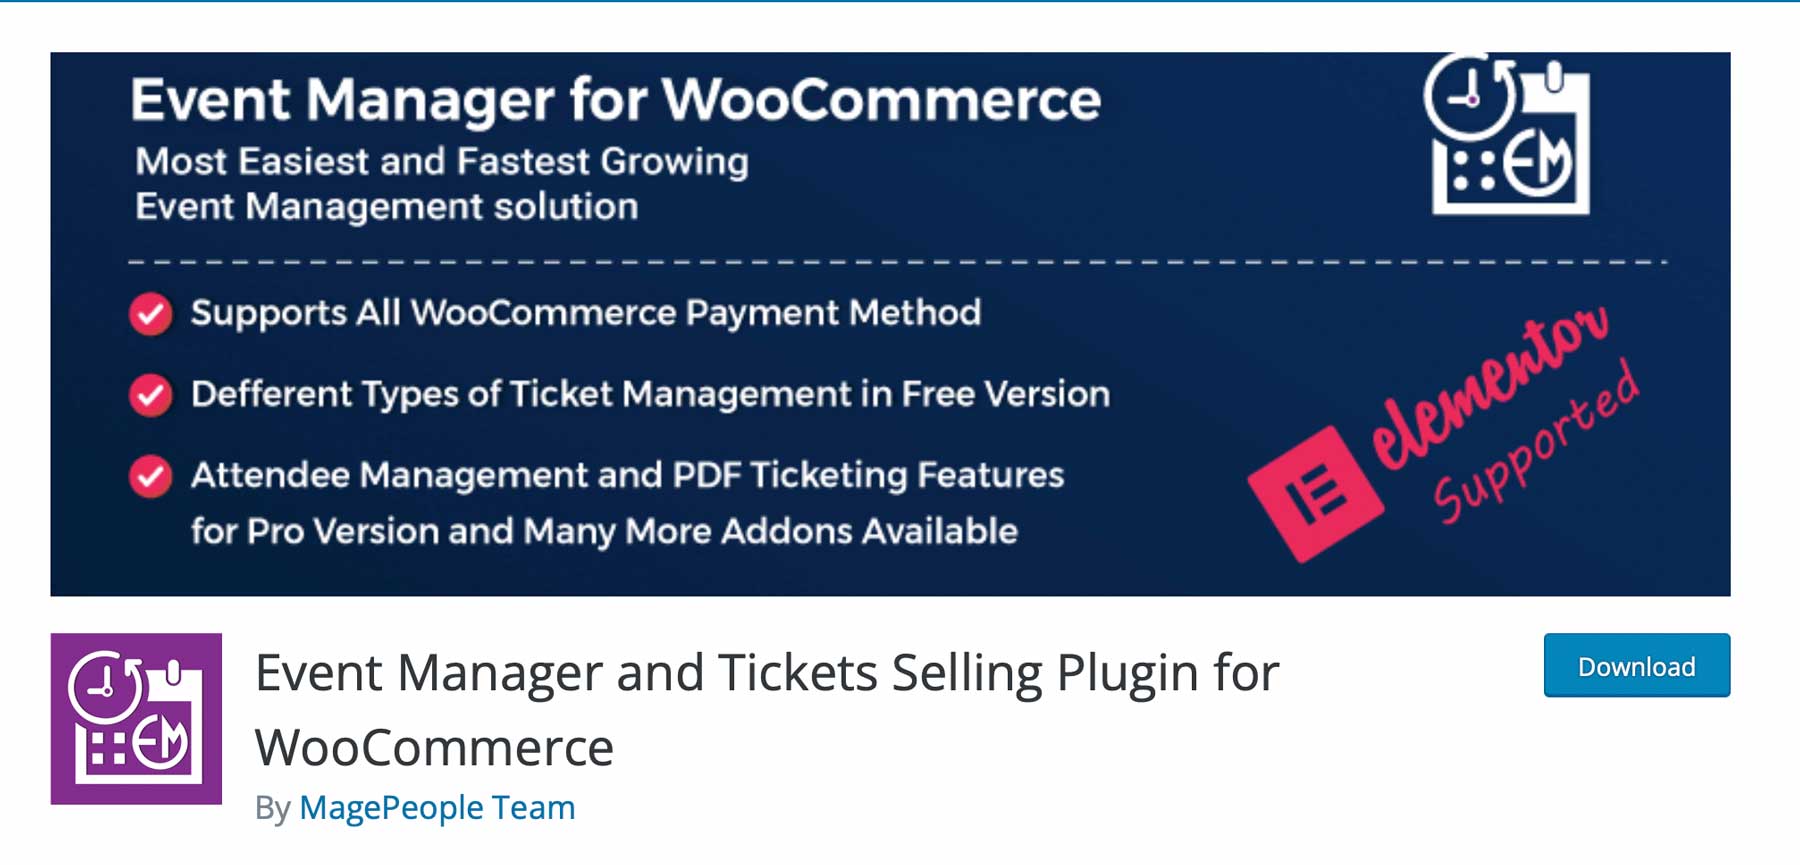 The WooCommerce Event Manager plugin